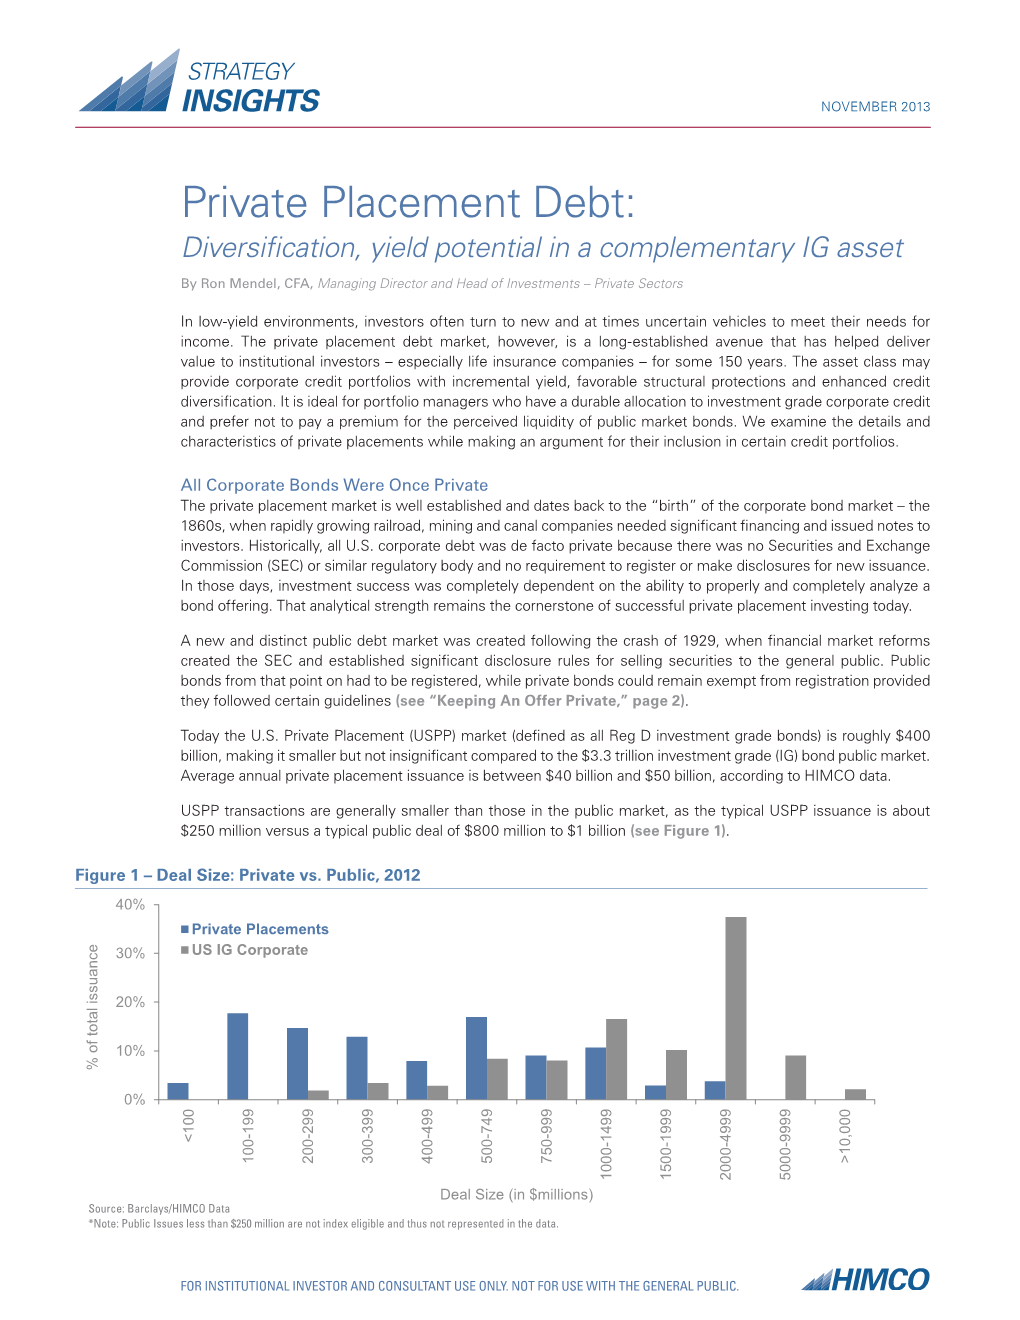 Private Placement Debt: Diversification, Yield Potential in a Complementary IG Asset